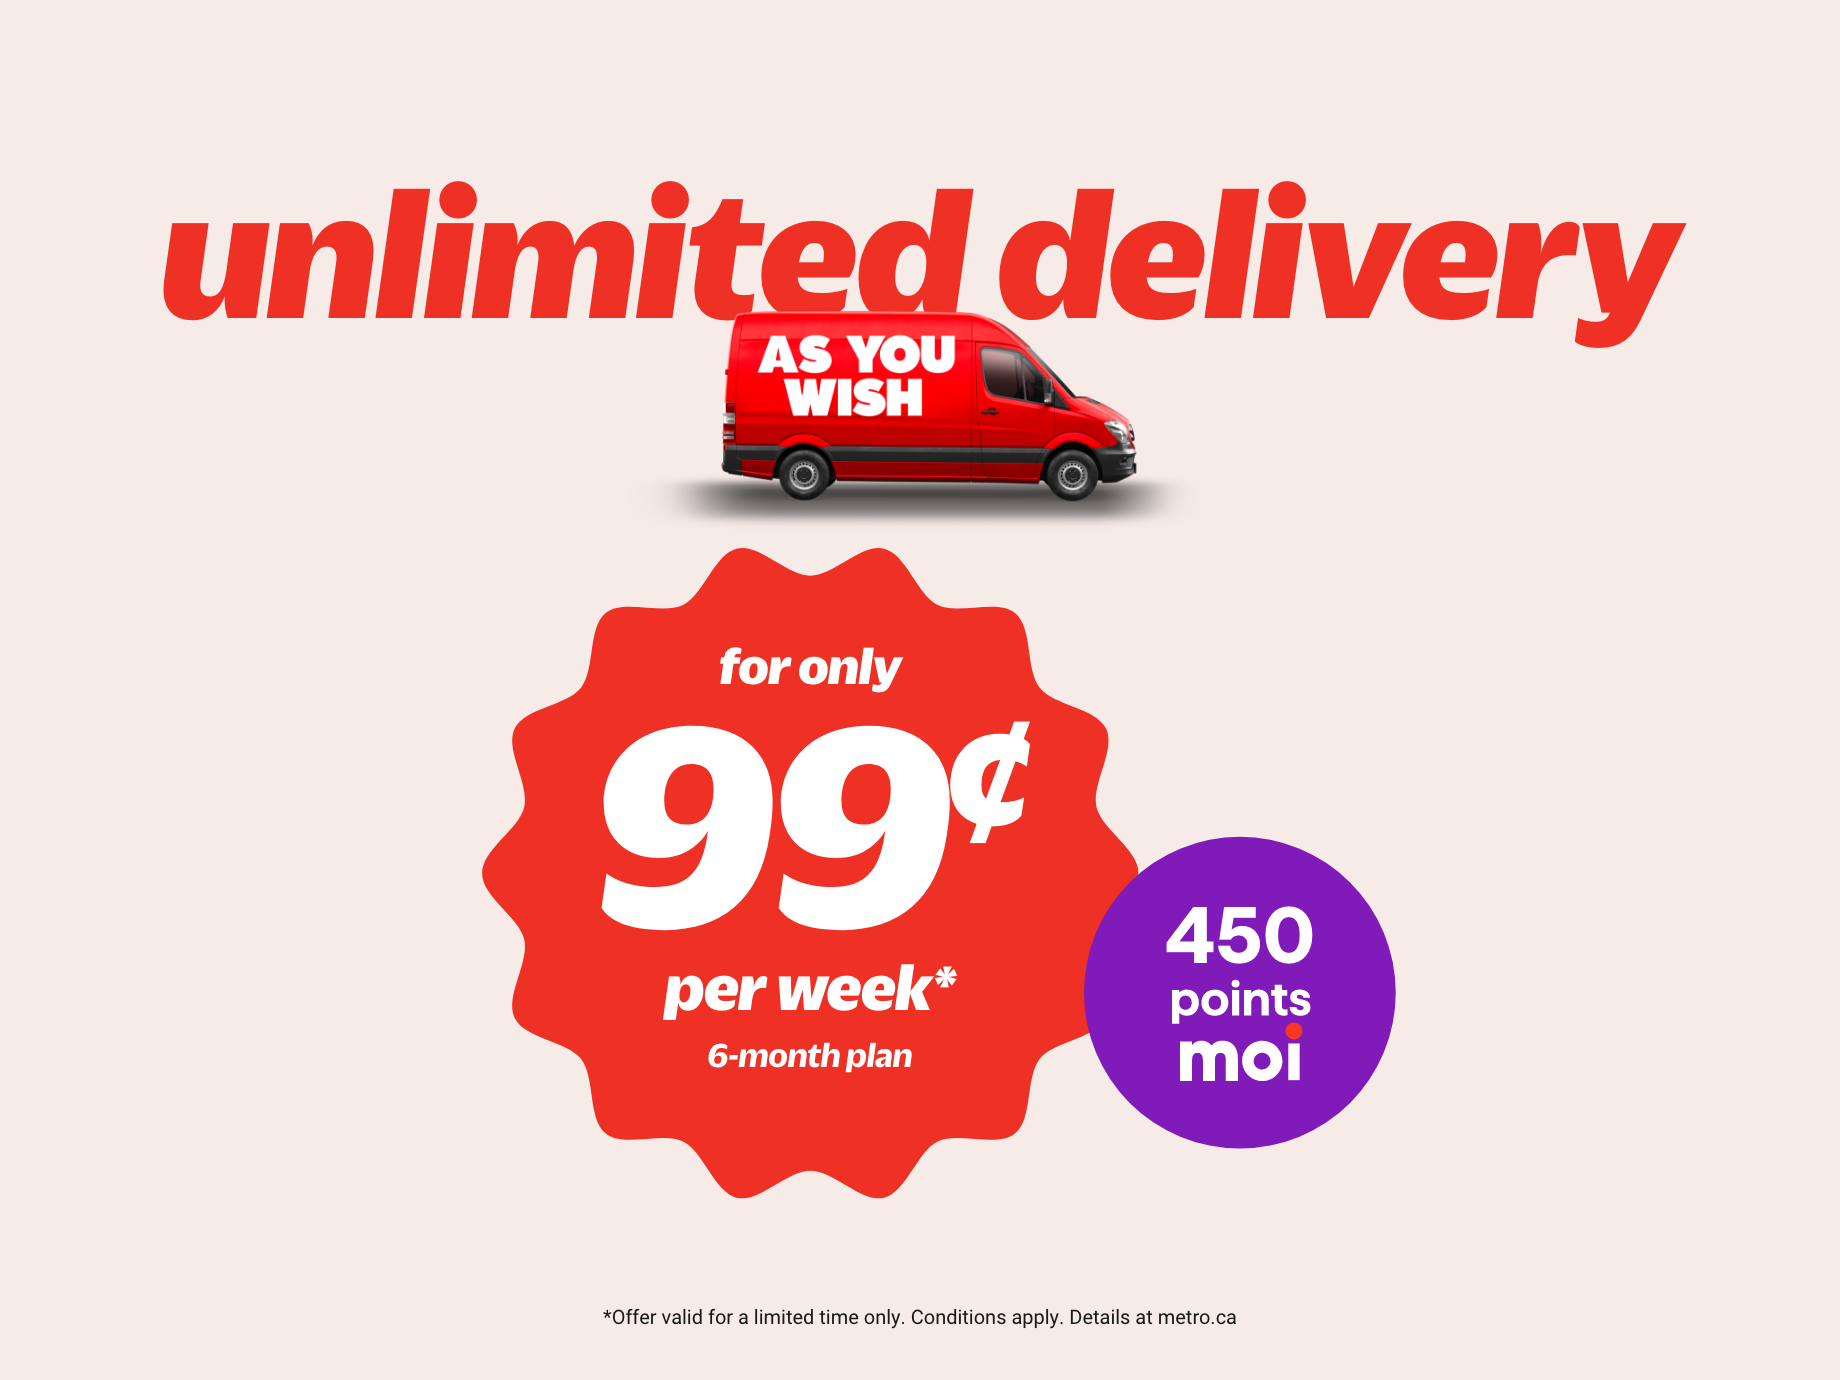 Unlimited delivery is 99¢ per week for 6 months*